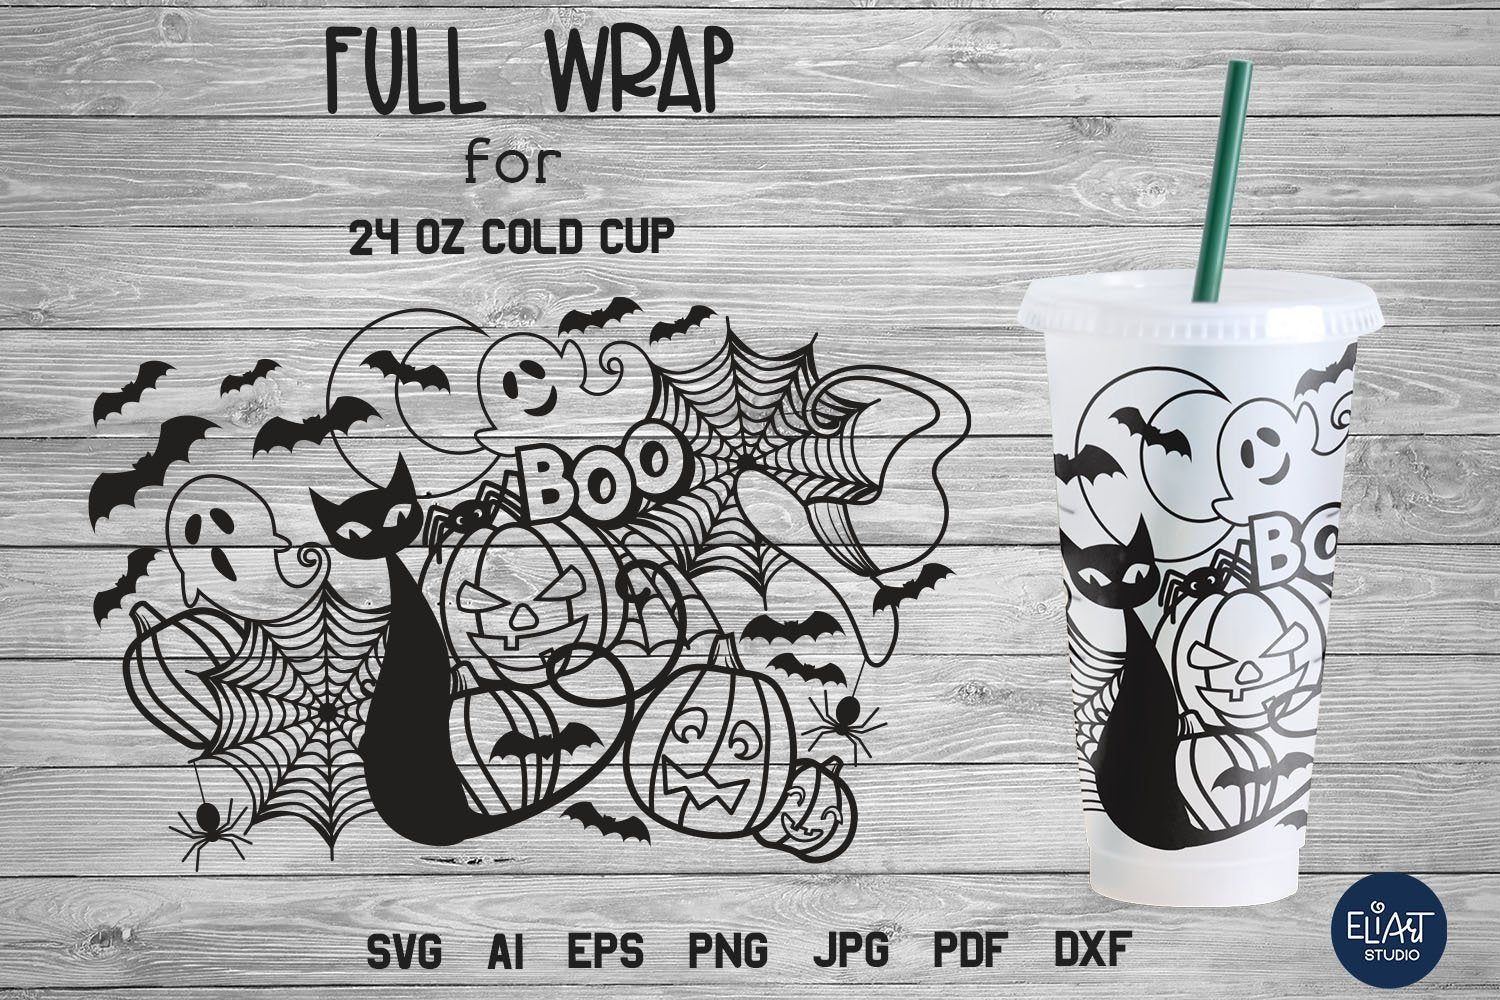 Cold Cup Wrap SVG, Halloween SVG, Full Wrap SVG no Hole. - So Fontsy